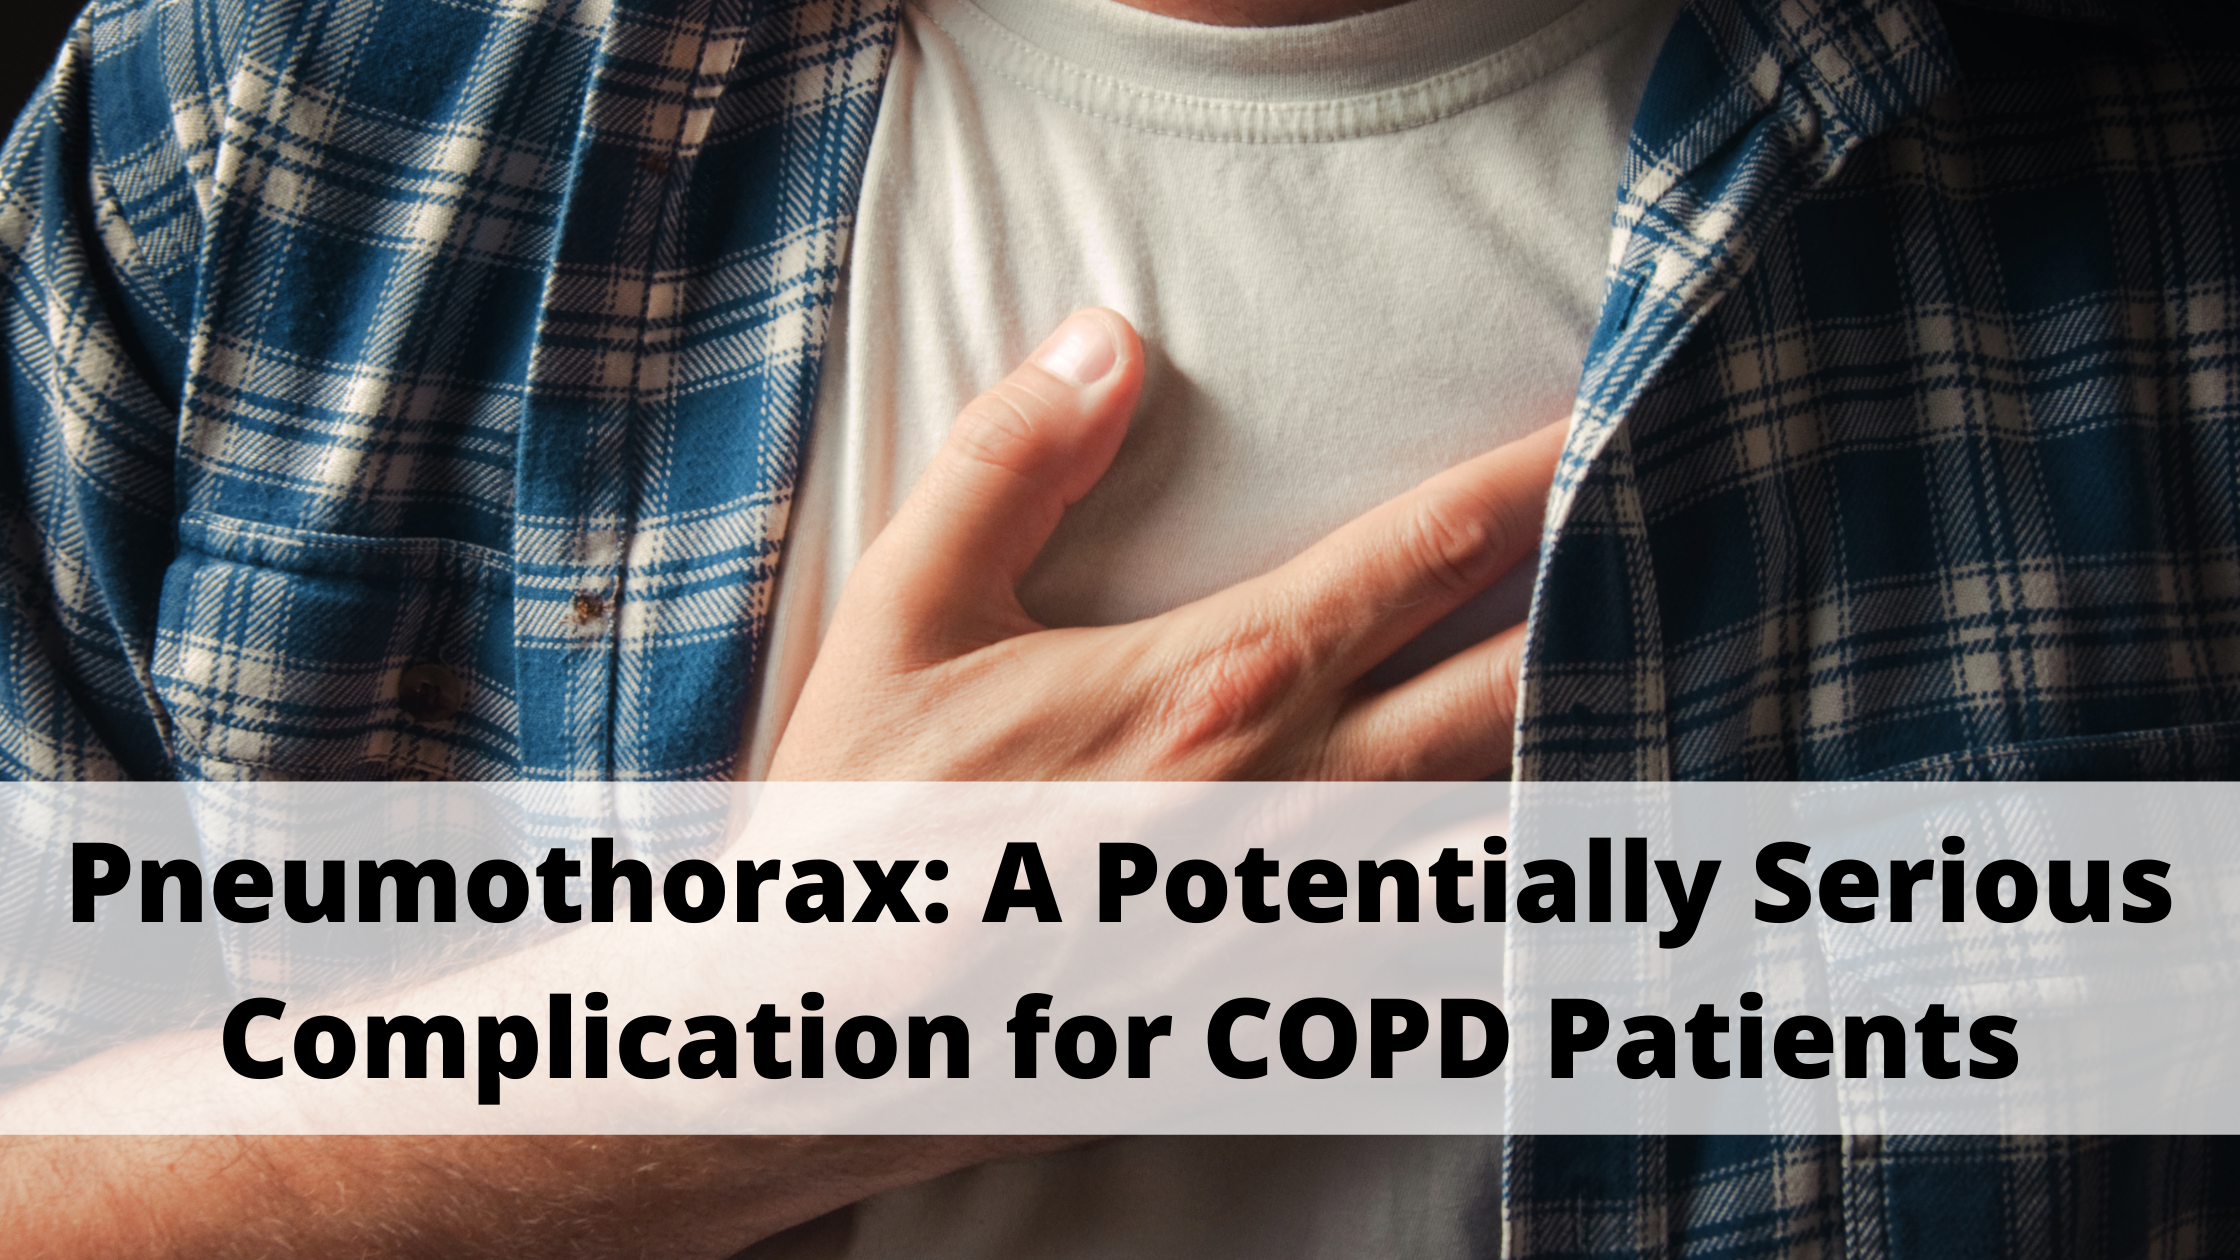 Pneumothorax: A Potentially Serious Complication for COPD Patients